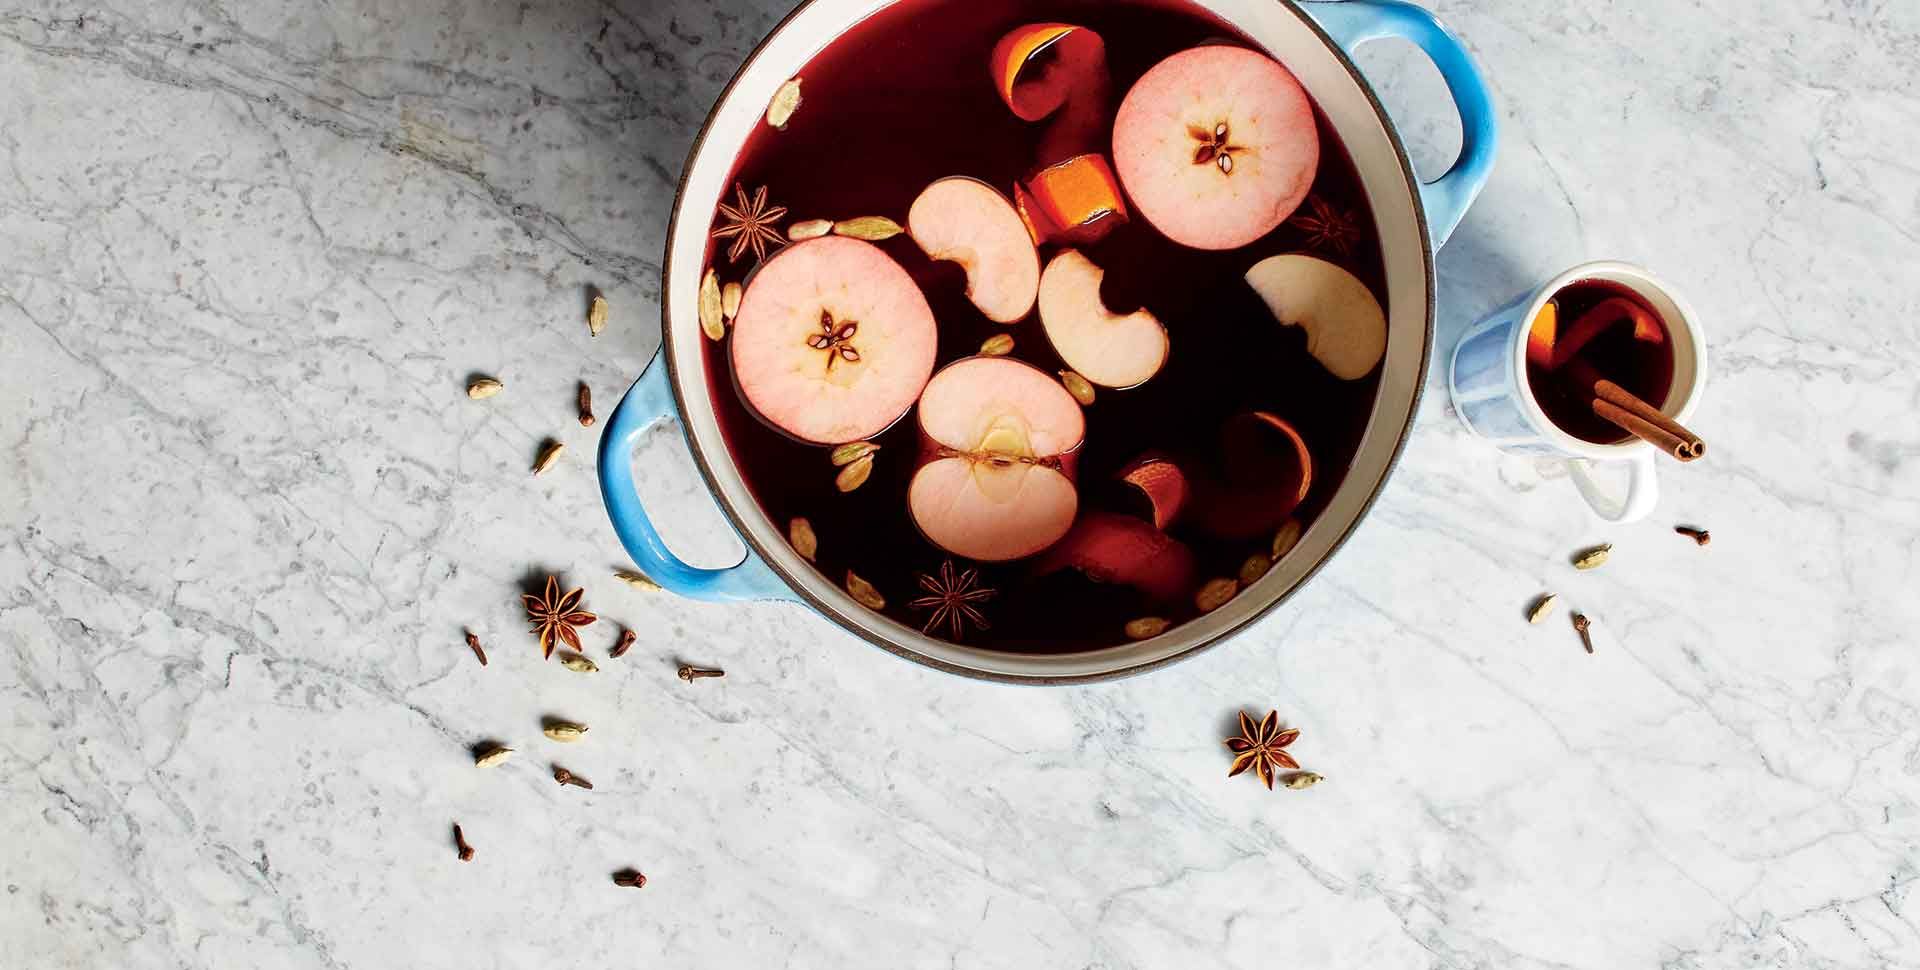 Traditional Mulled Wine